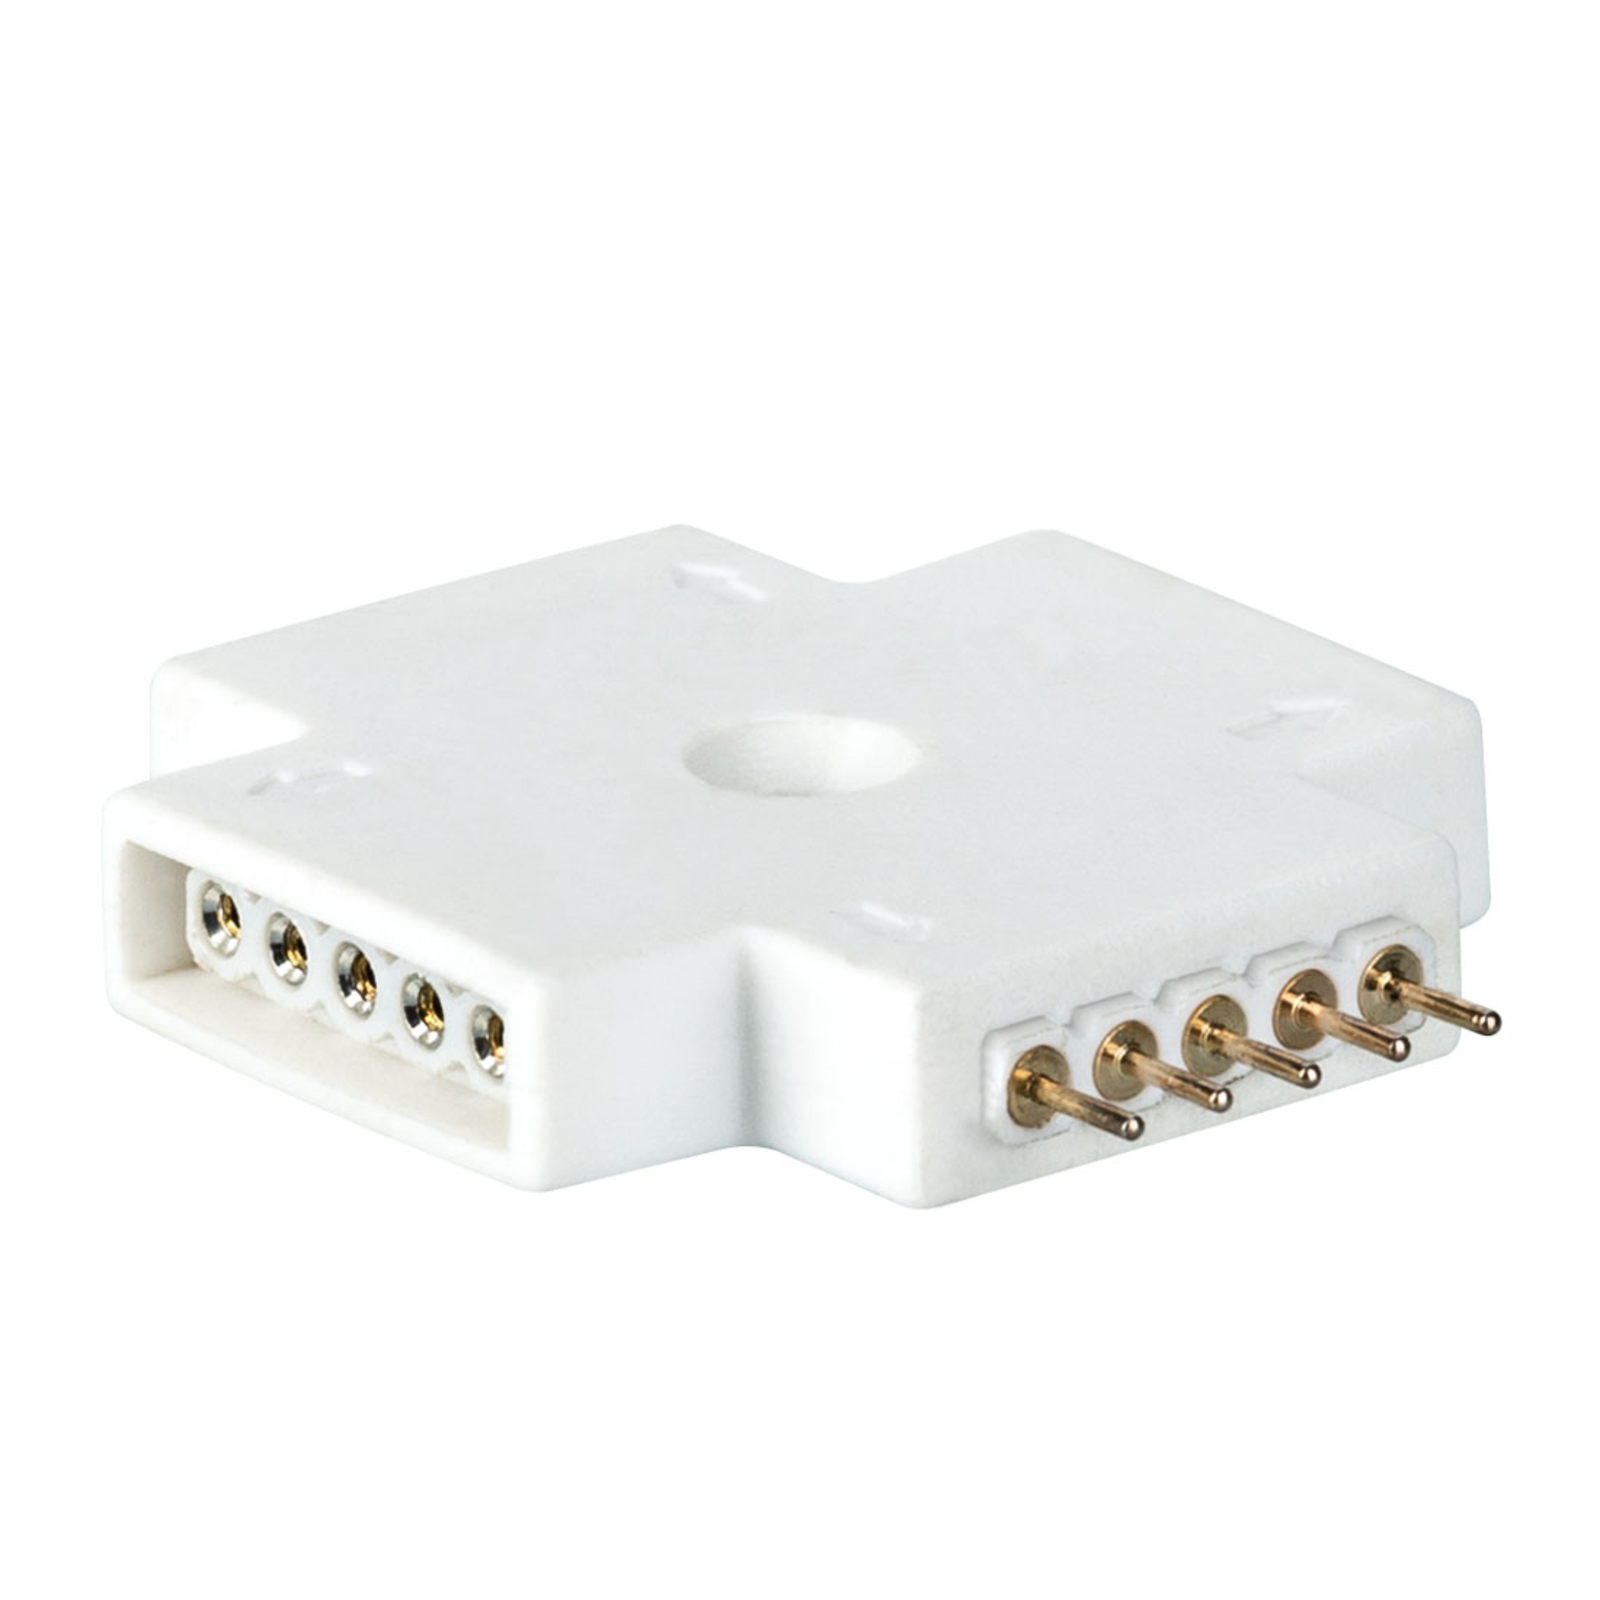 X-connector for Max LED strip